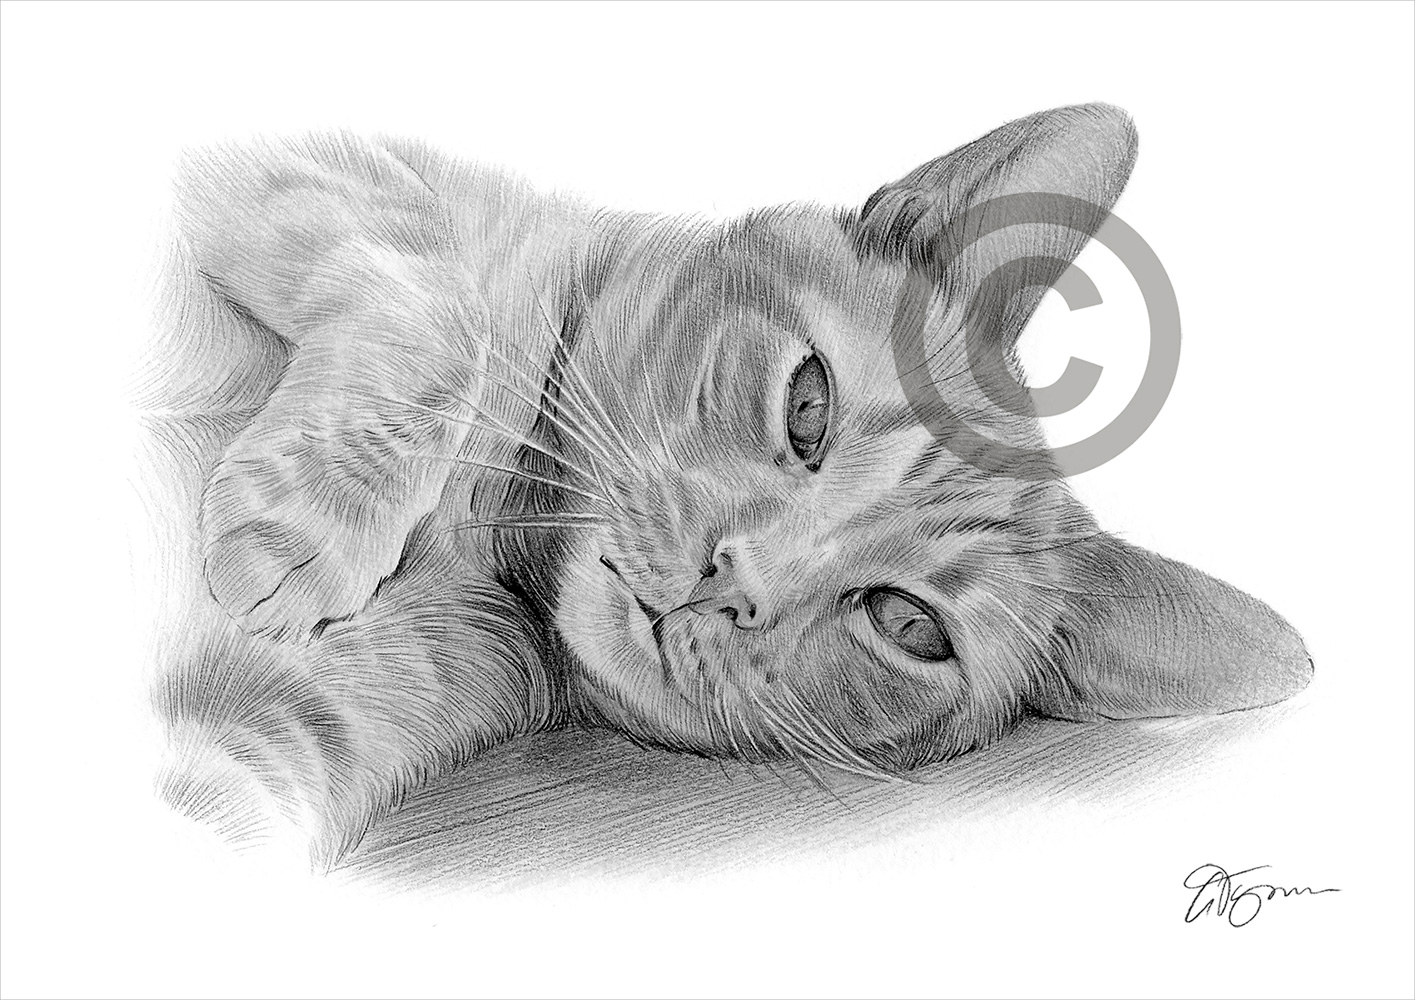 Pencil drawing commission of a tired cat by artist Gary Tymon